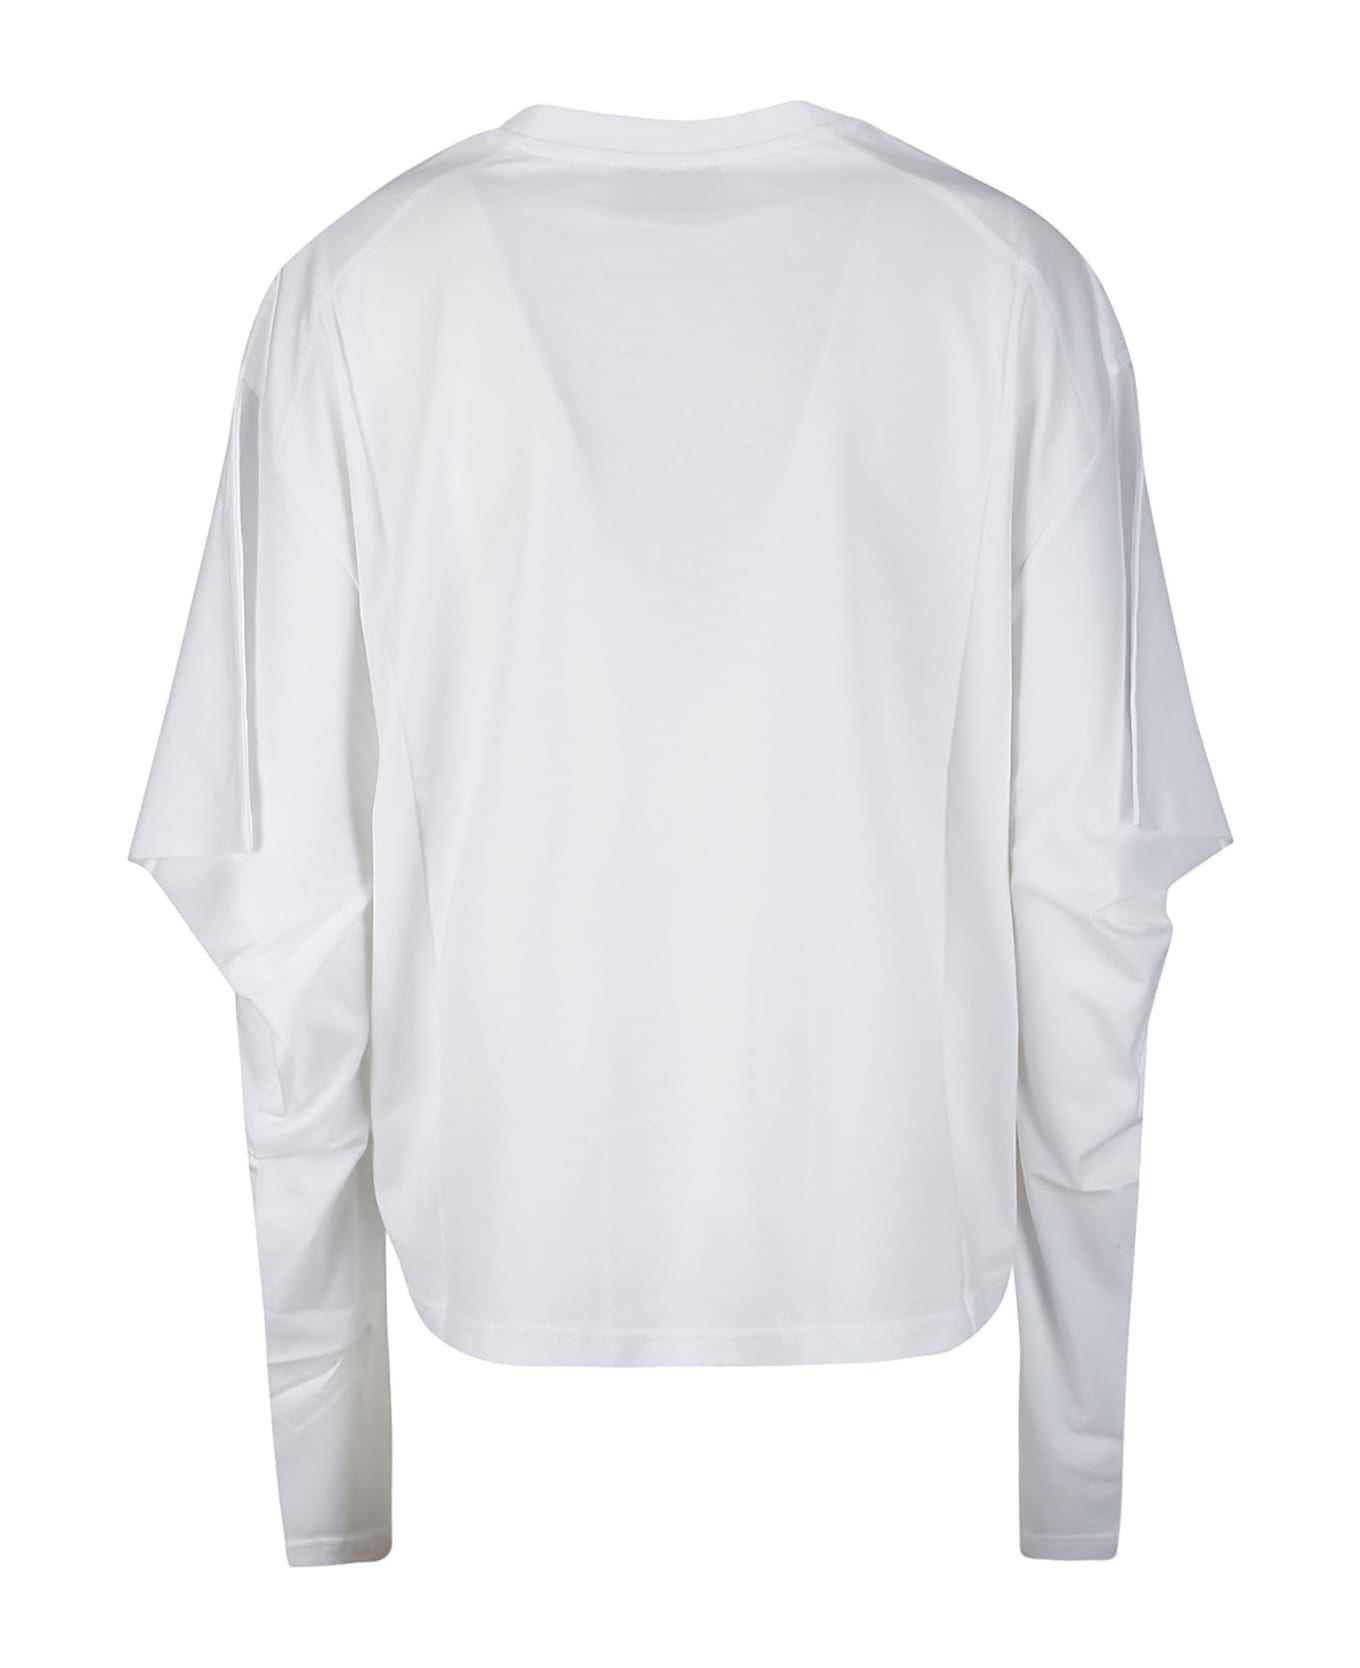 Setchu Origami Jersey Top - WHITE トップス